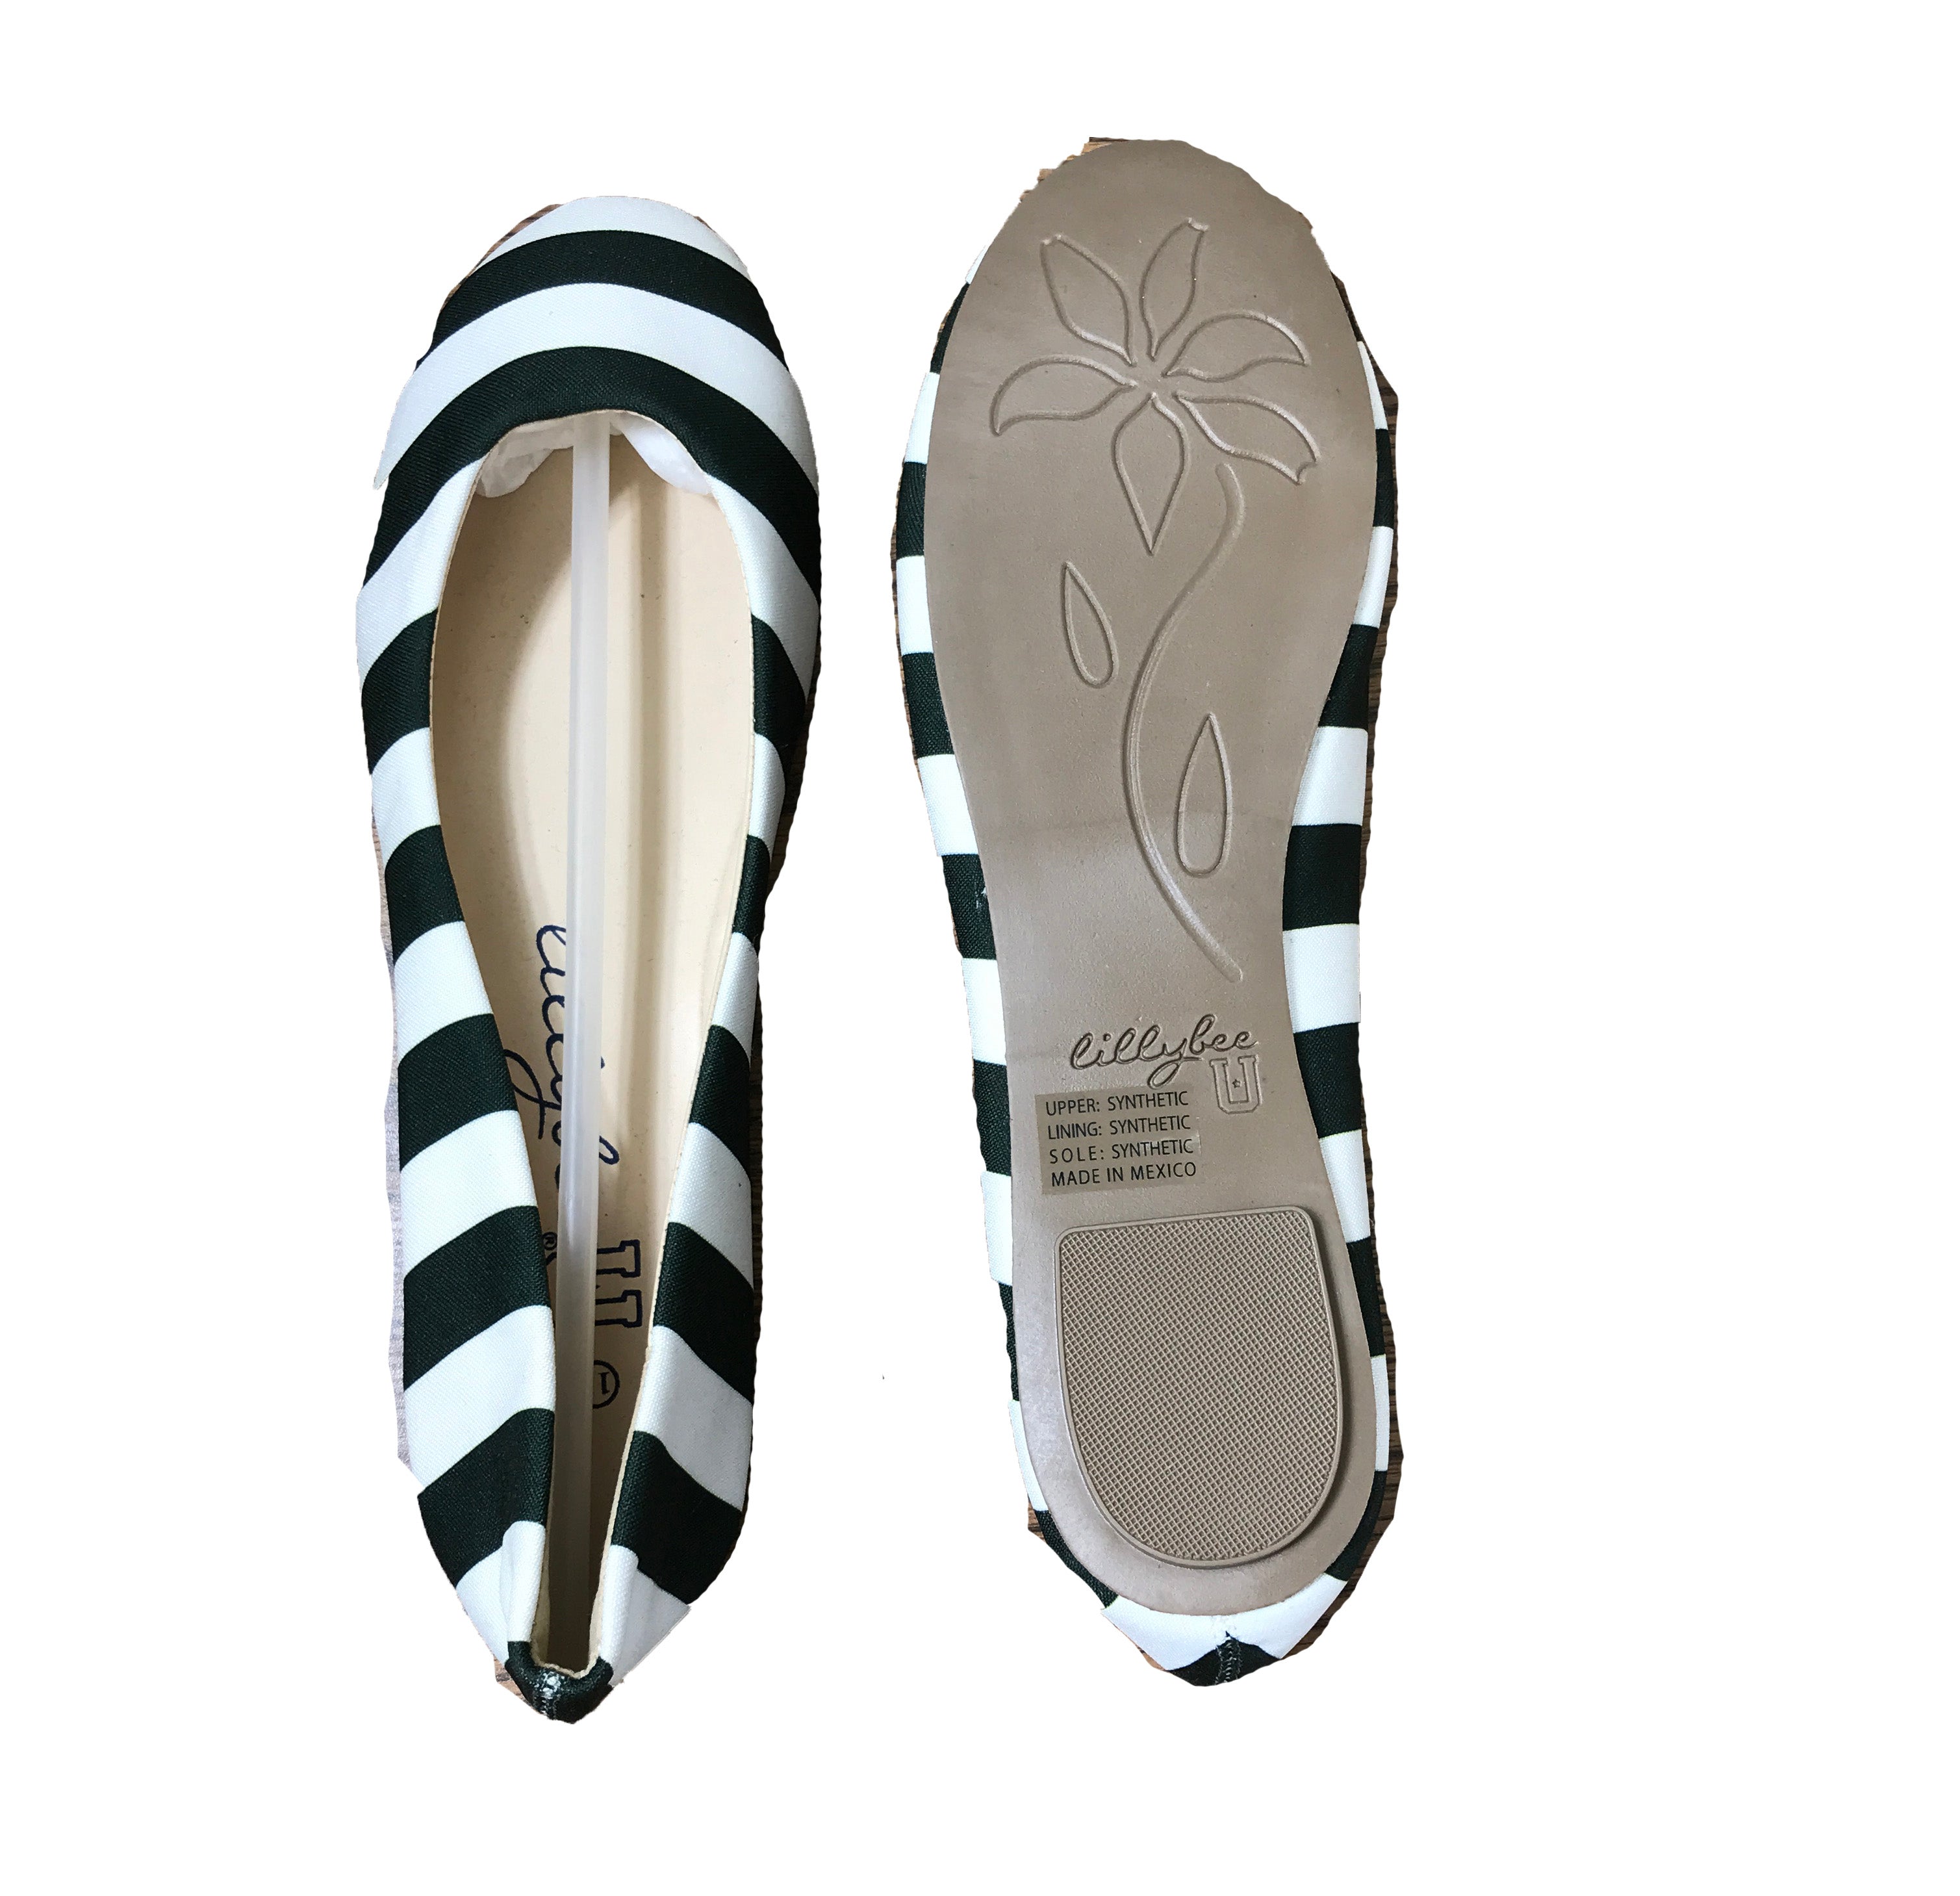 Lillylee Green and White Flats Women's Size 11